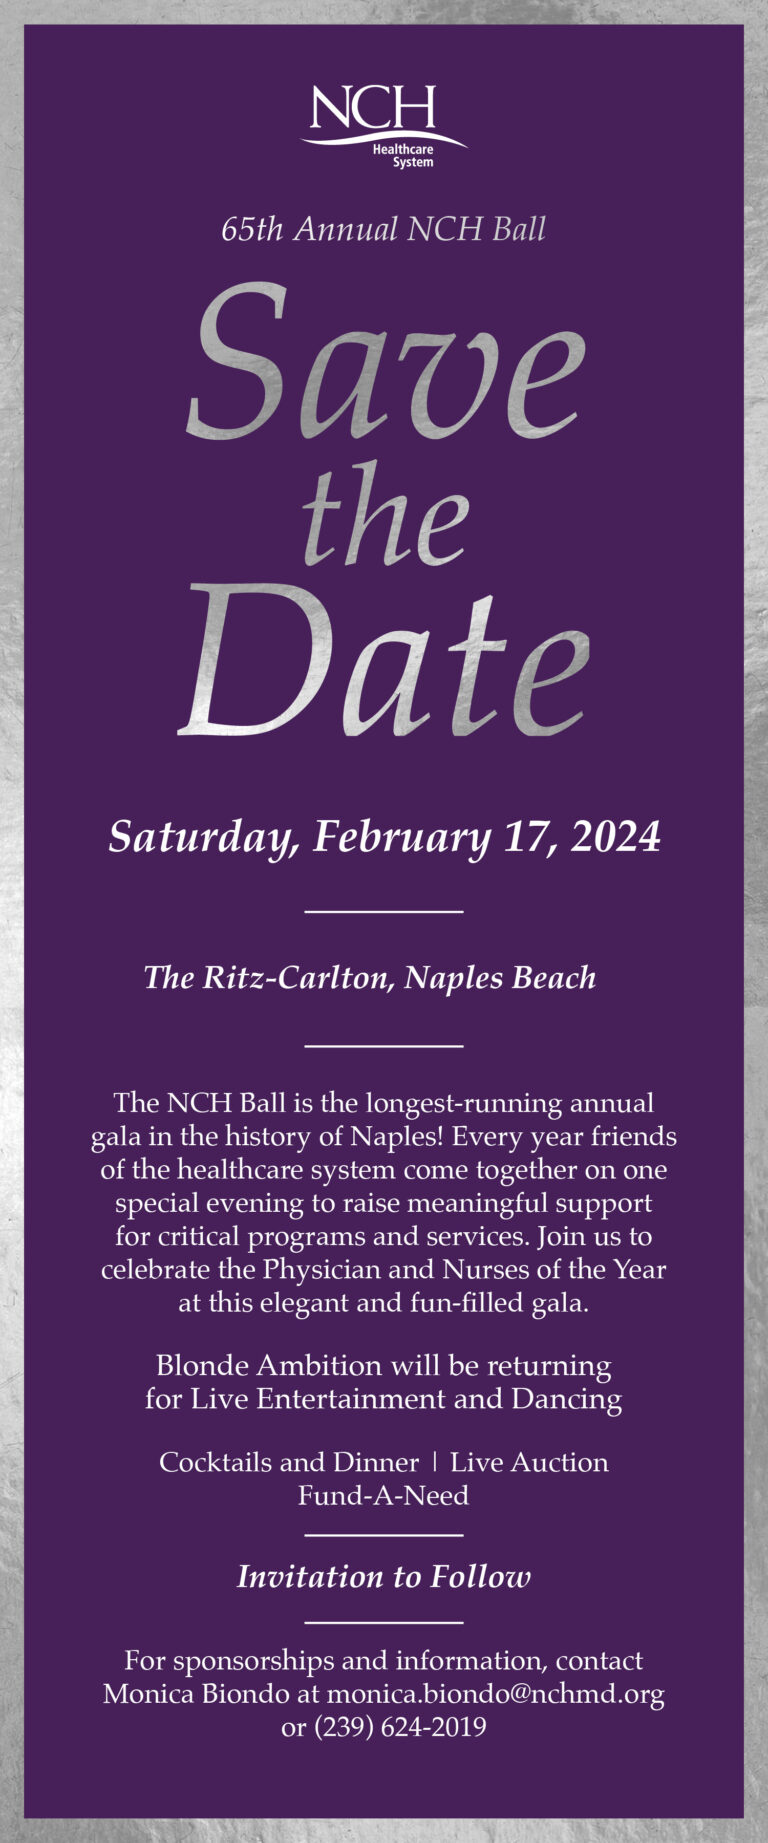 NCH Philanthropy 65th NCH Ball save the date